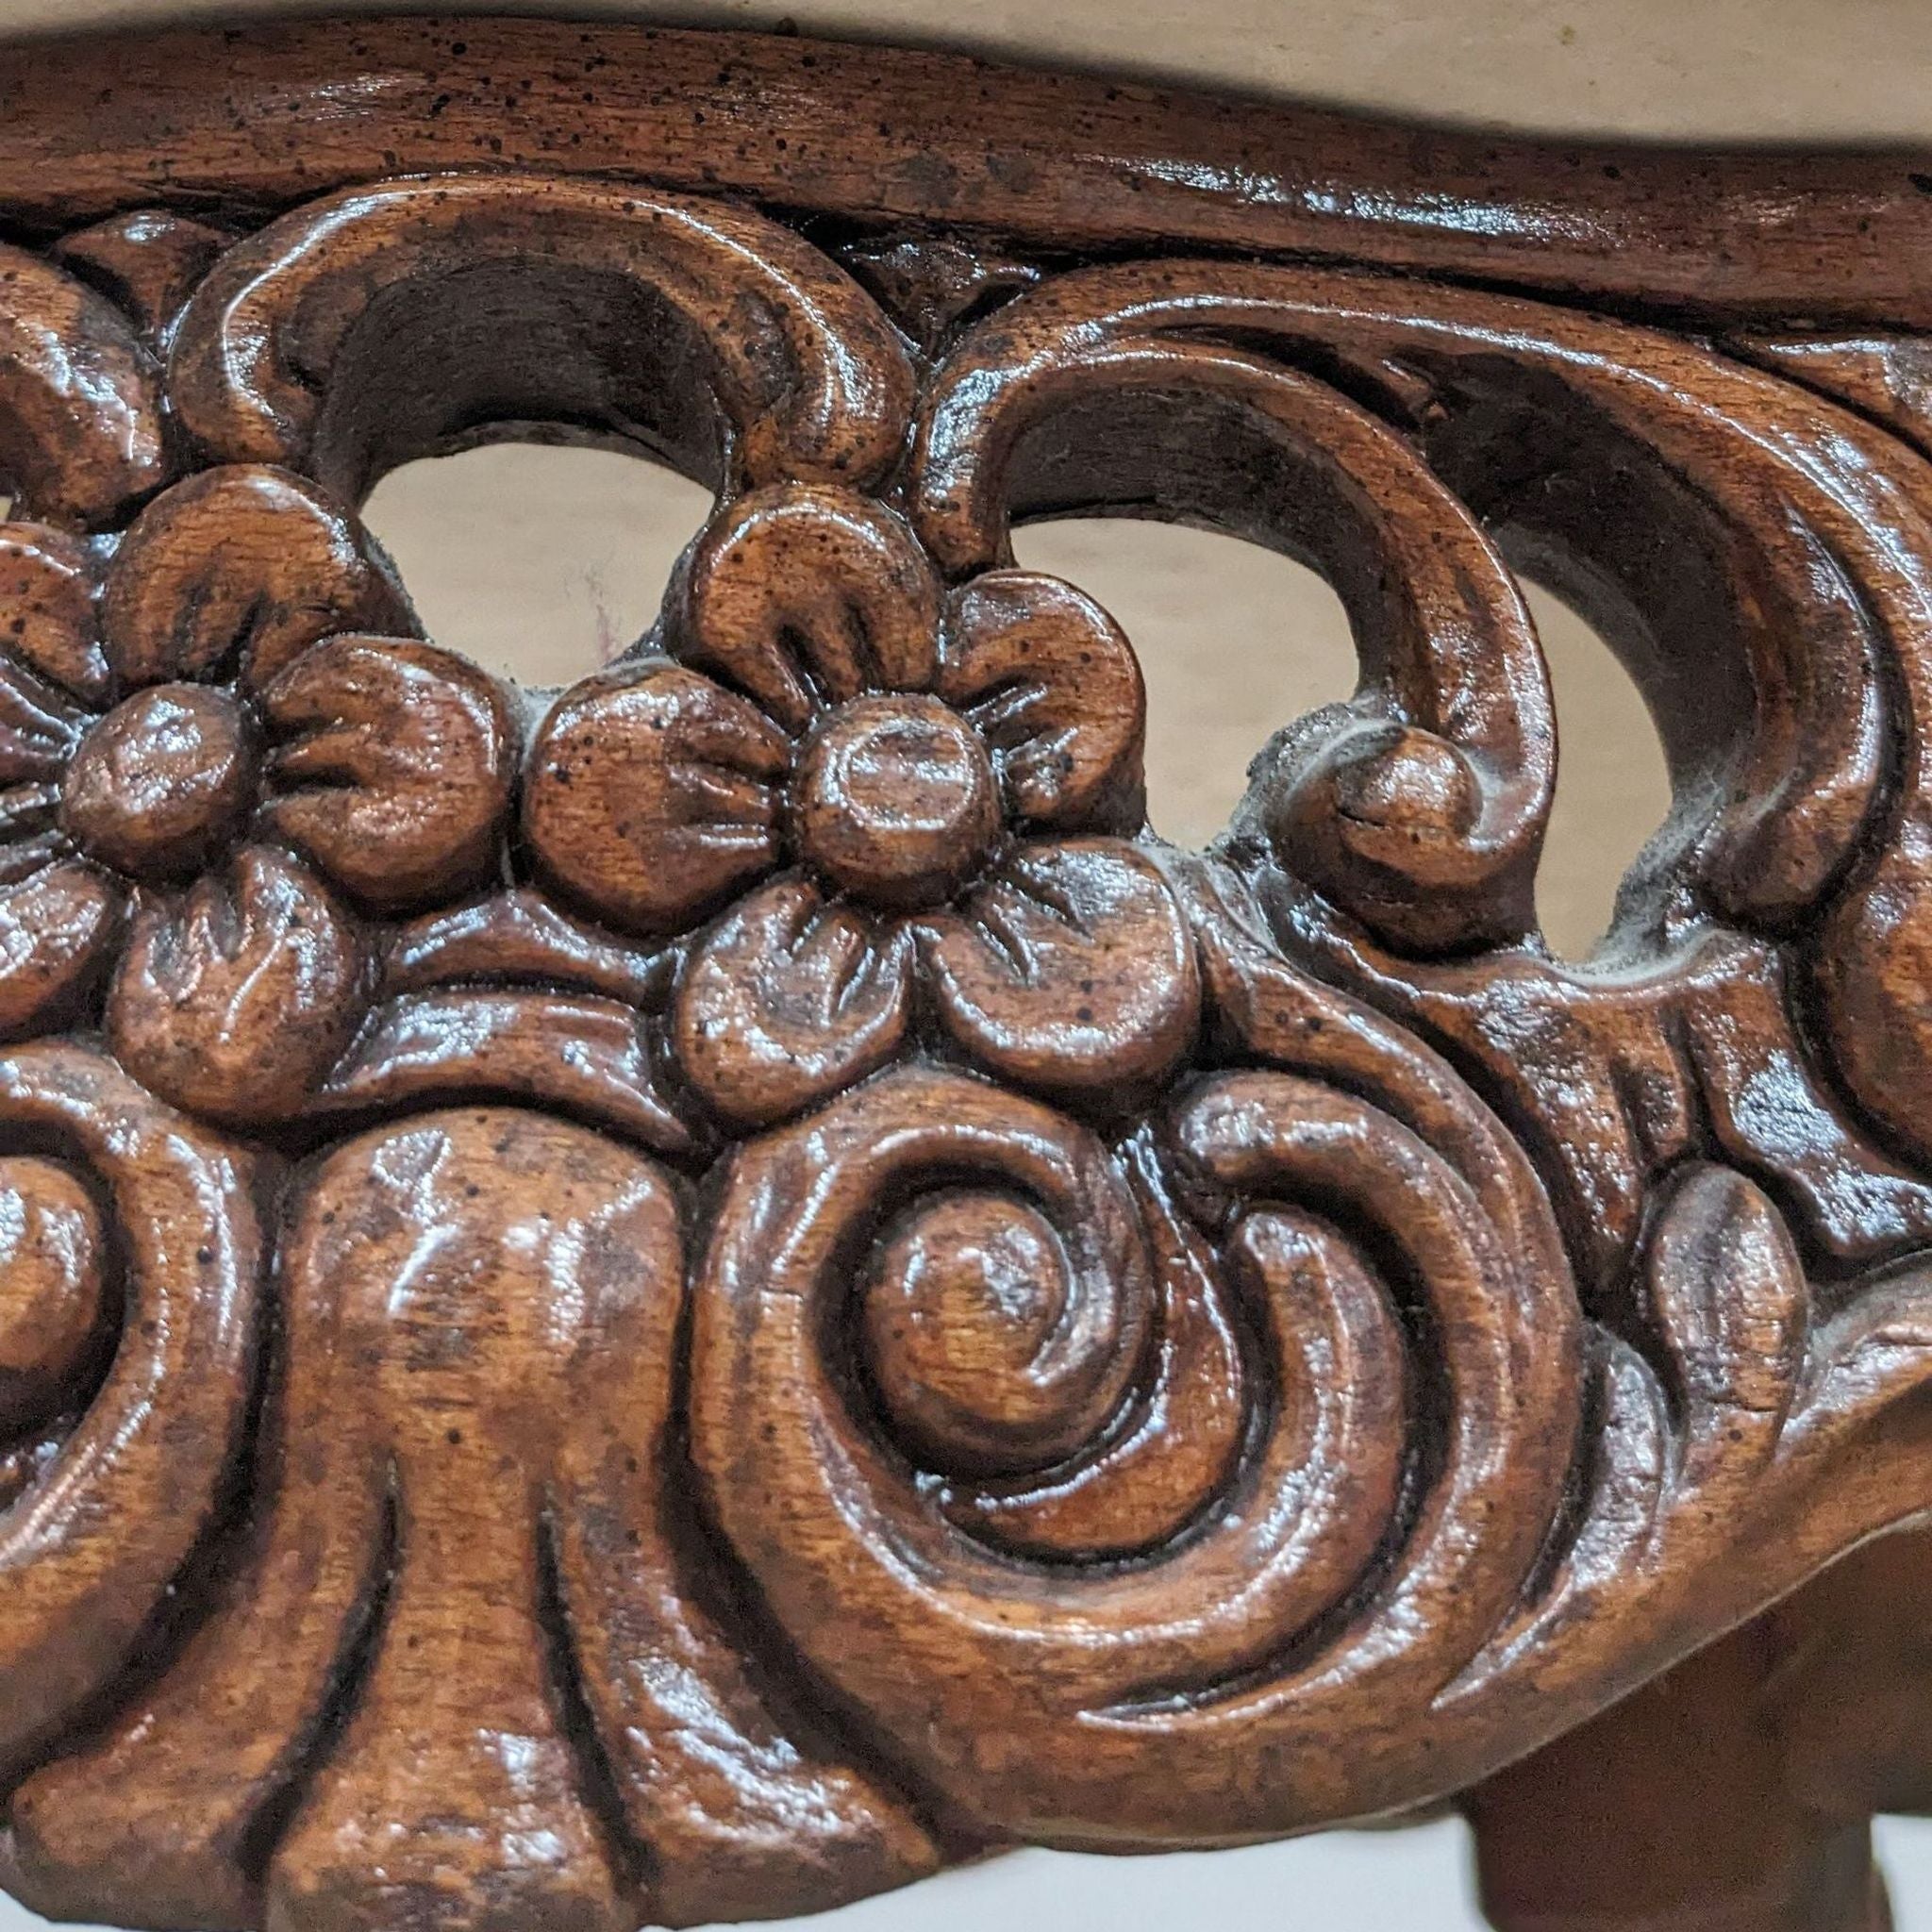 Image 2: Close-up of Reperch end table's wood carving, showcasing intricate floral patterns.